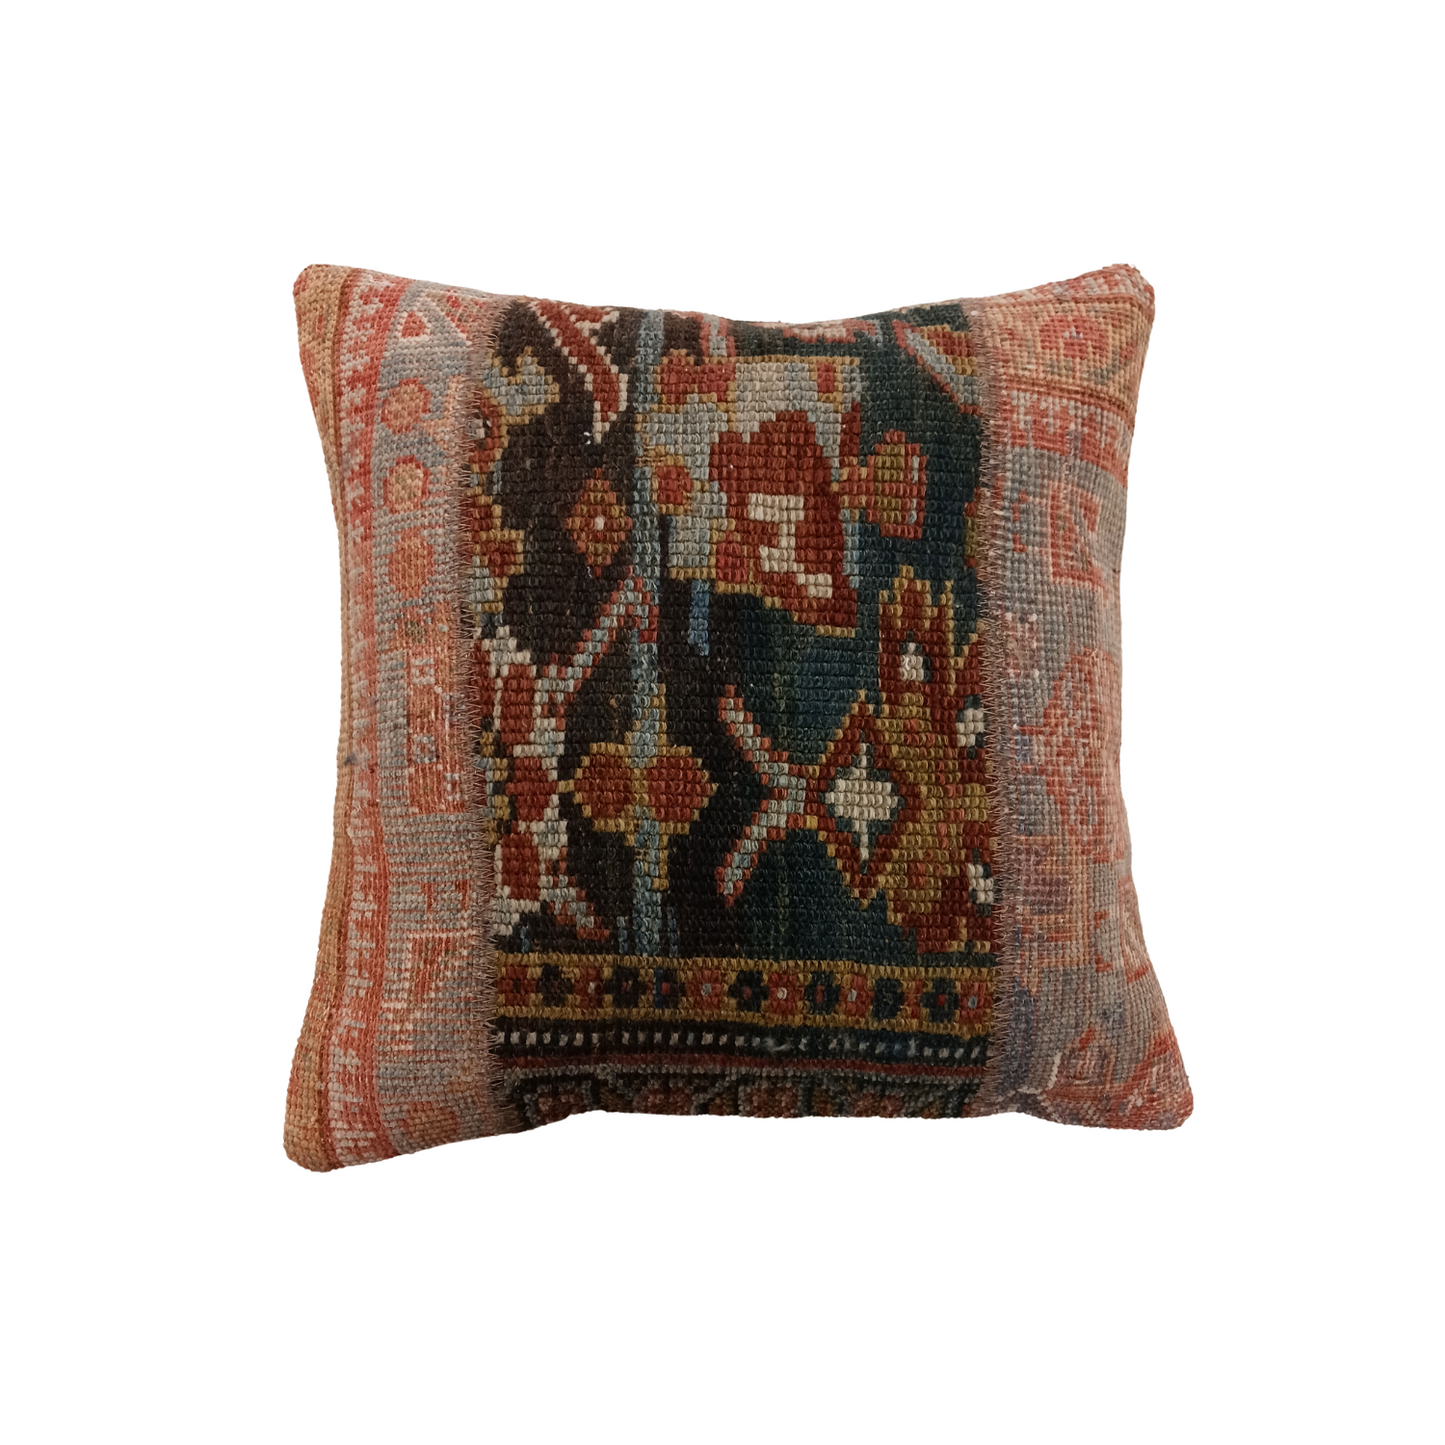 One of a Kind Vintage Pillow- Sunset